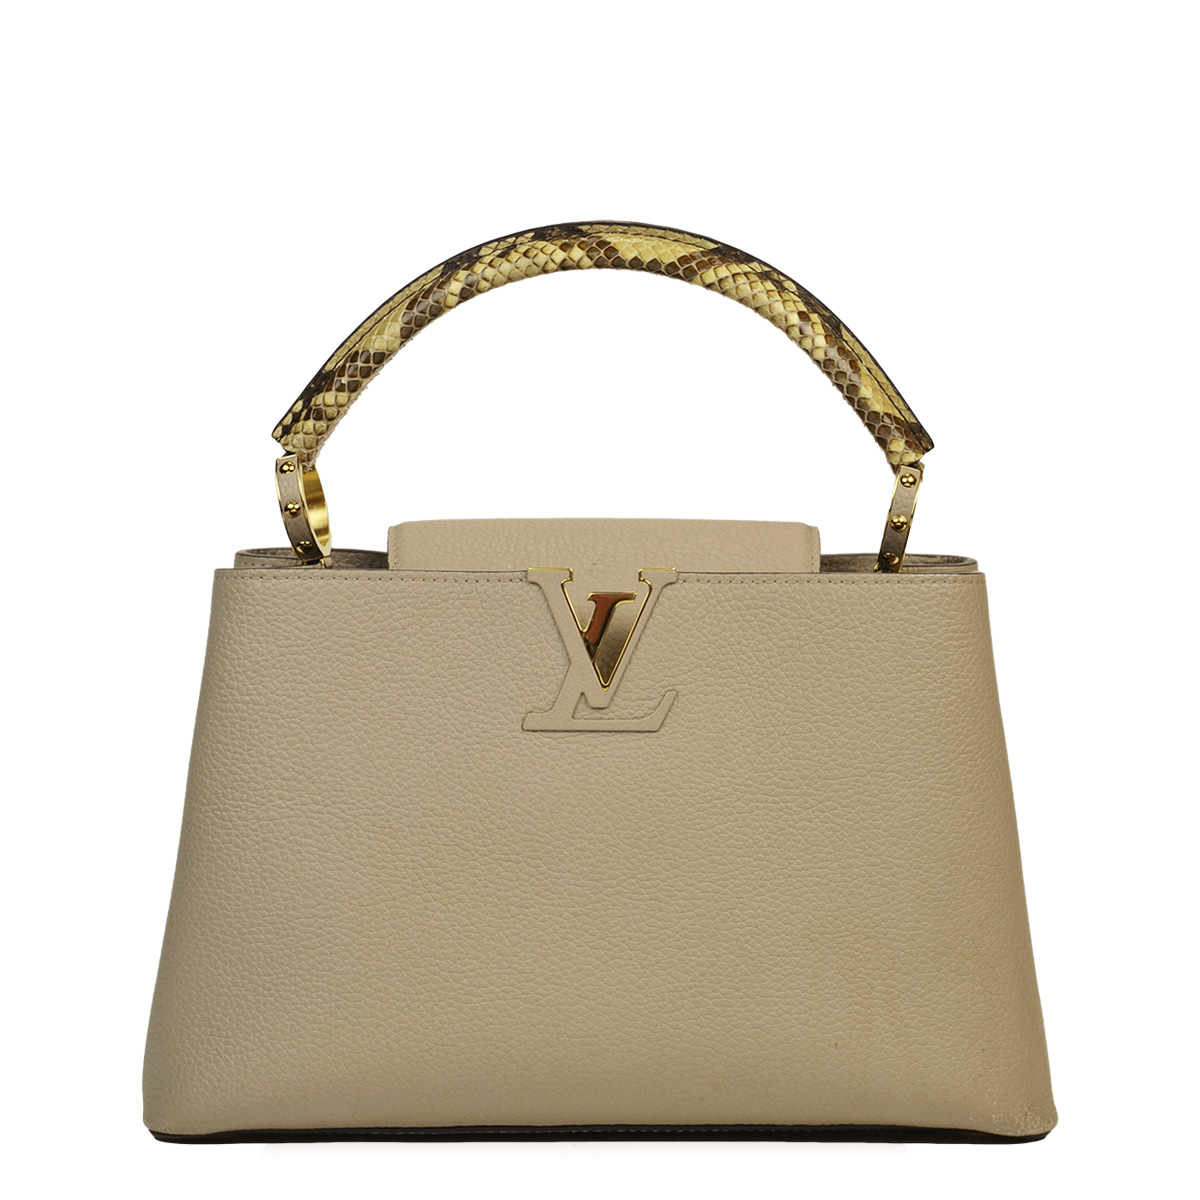 Louis Vuitton - Authenticated Capucines Handbag - Leather Beige Plain for Women, Never Worn, with Tag